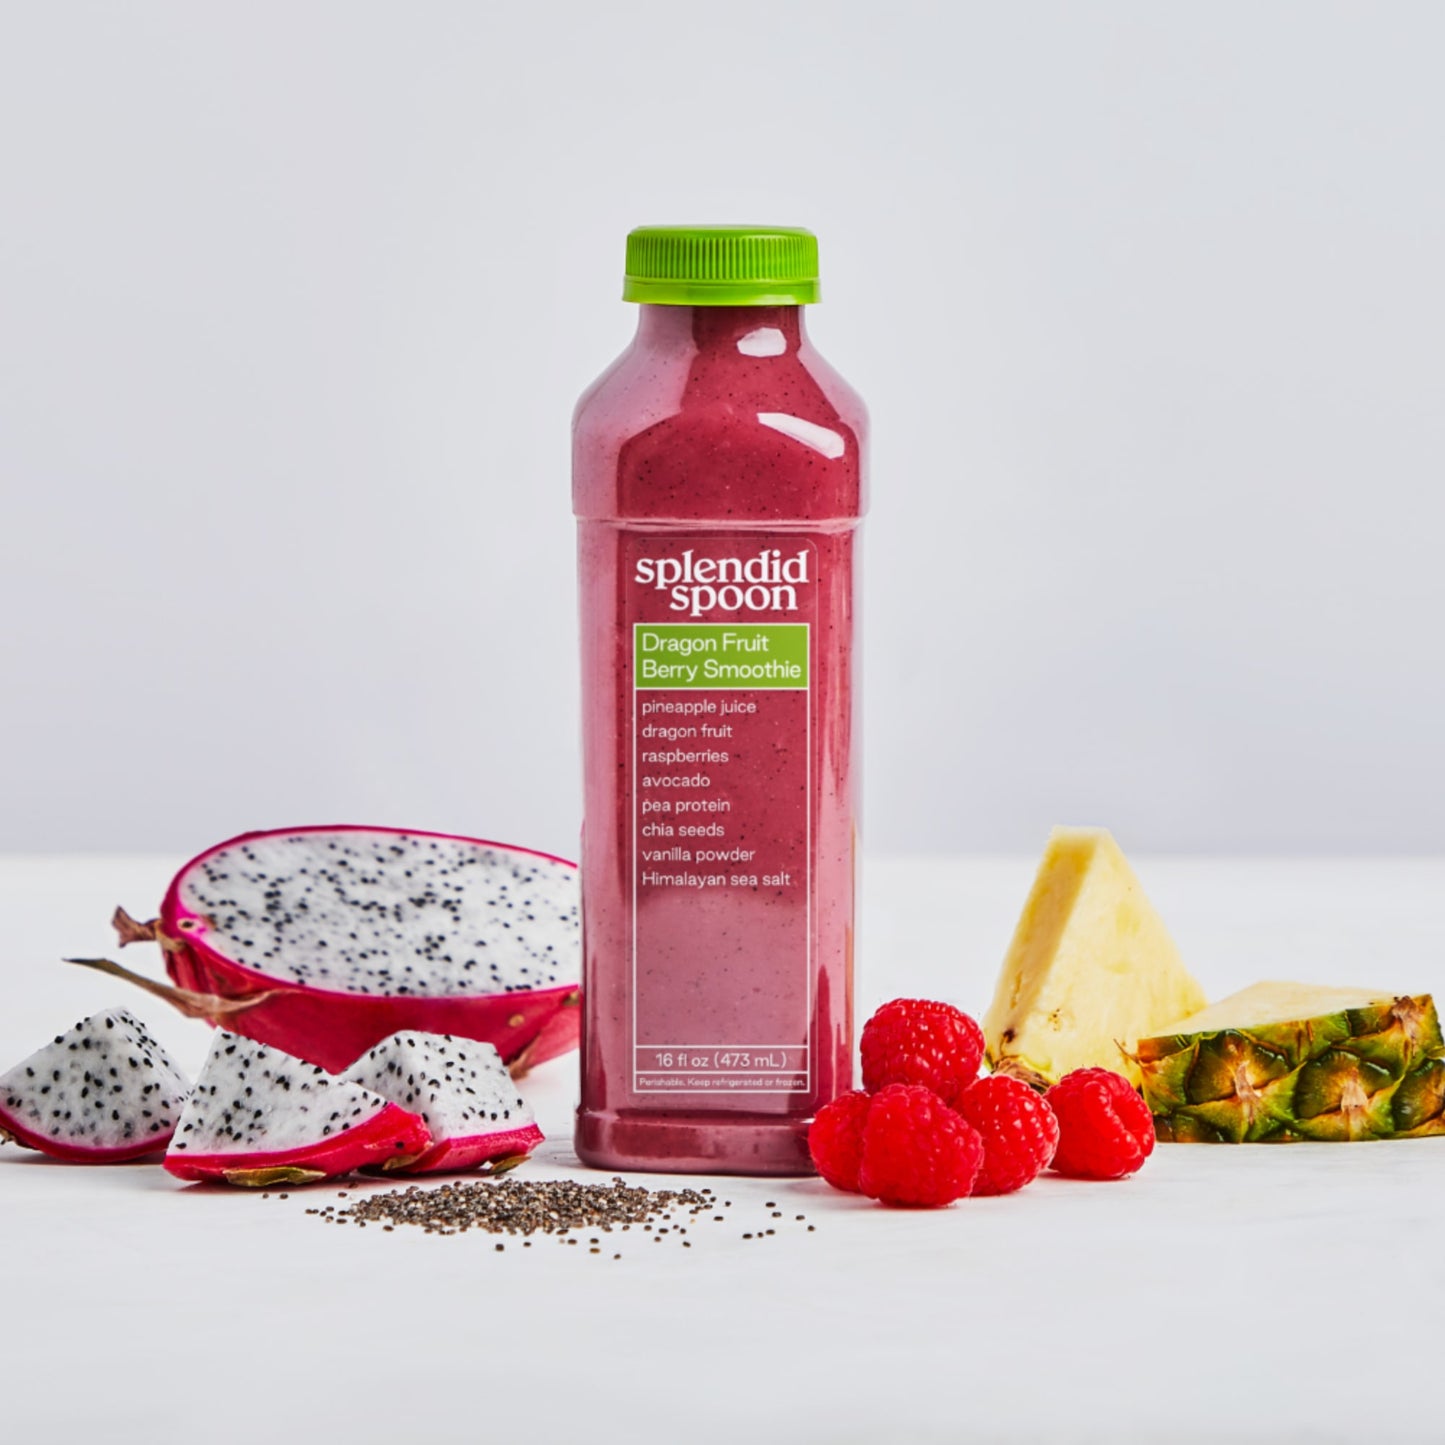 Splendid Spoon Dragon Fruit Berry Smoothie  surrounded by fruits and veggies